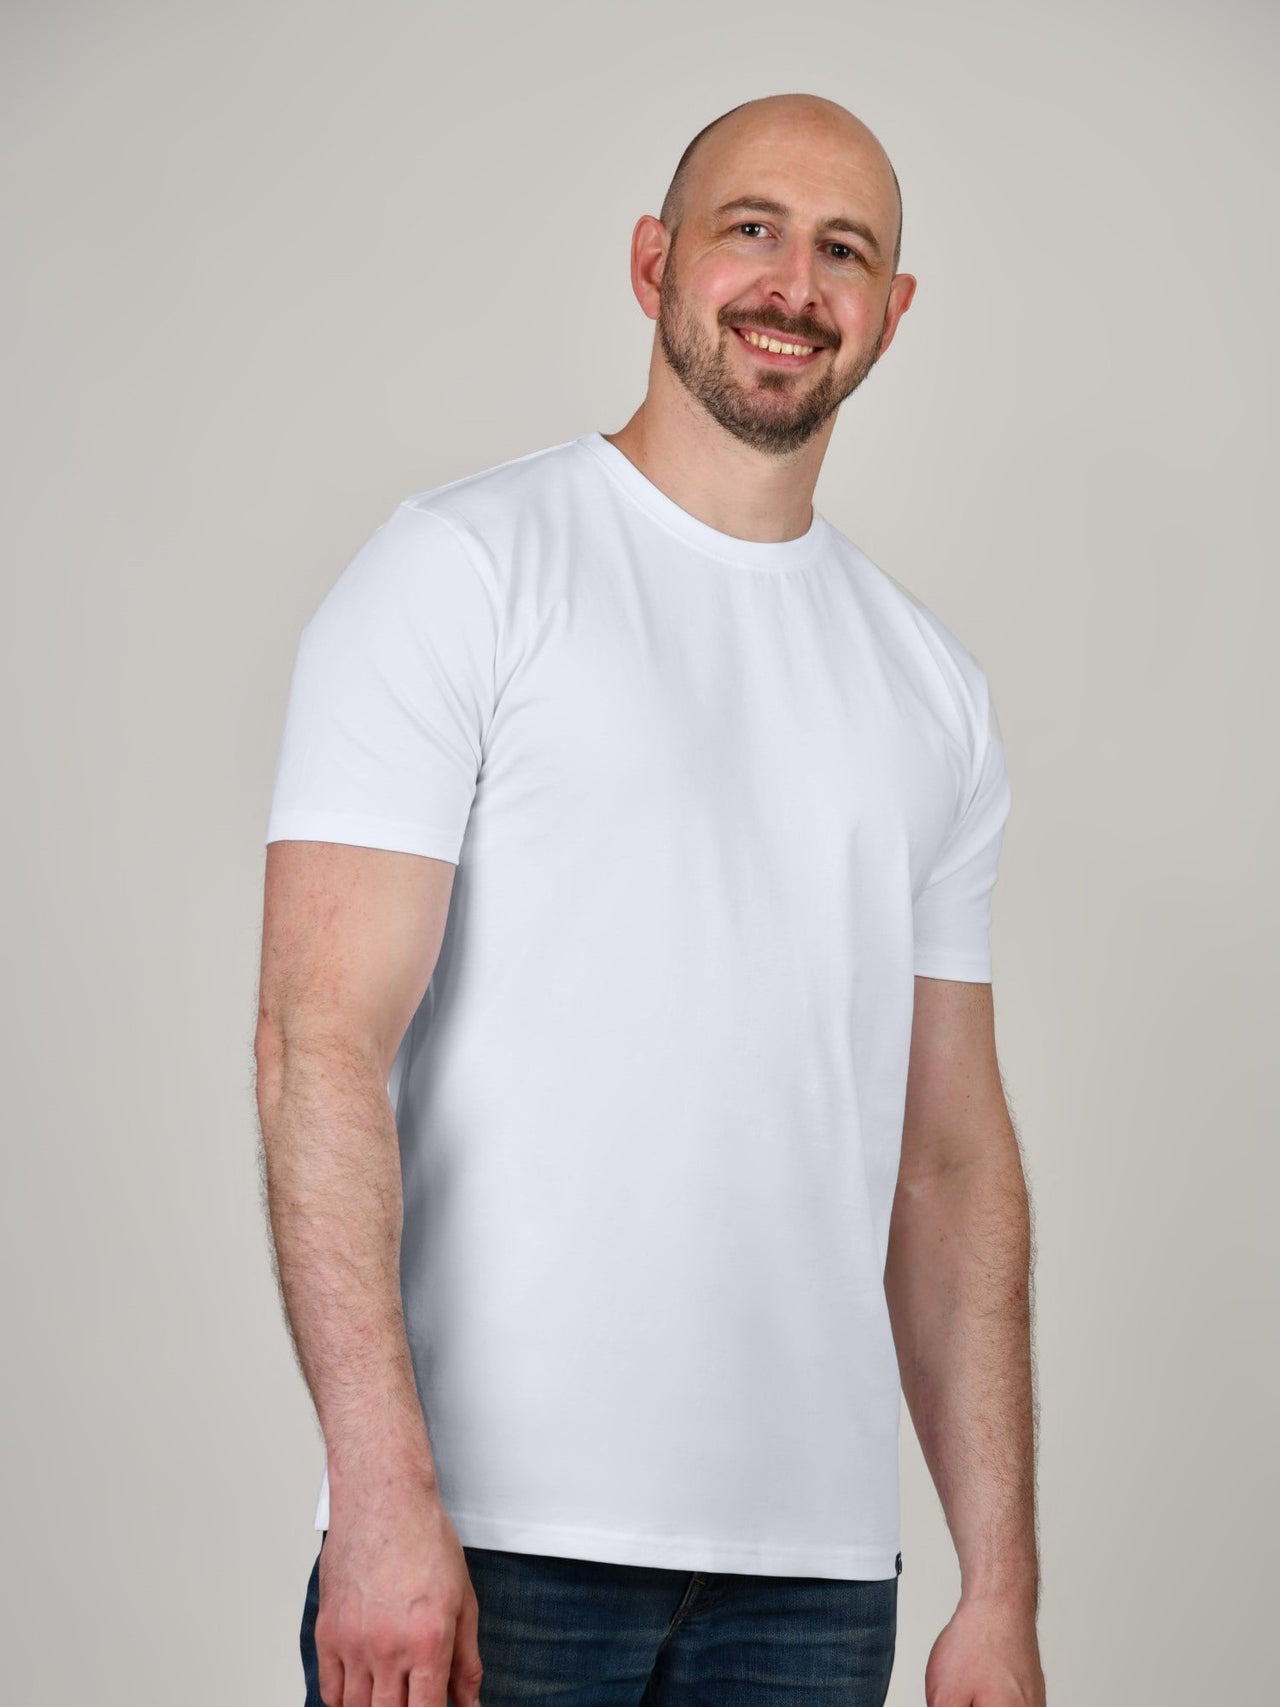 A tall and slim guy in the studio wearing a white XL tall slim t-shirt.